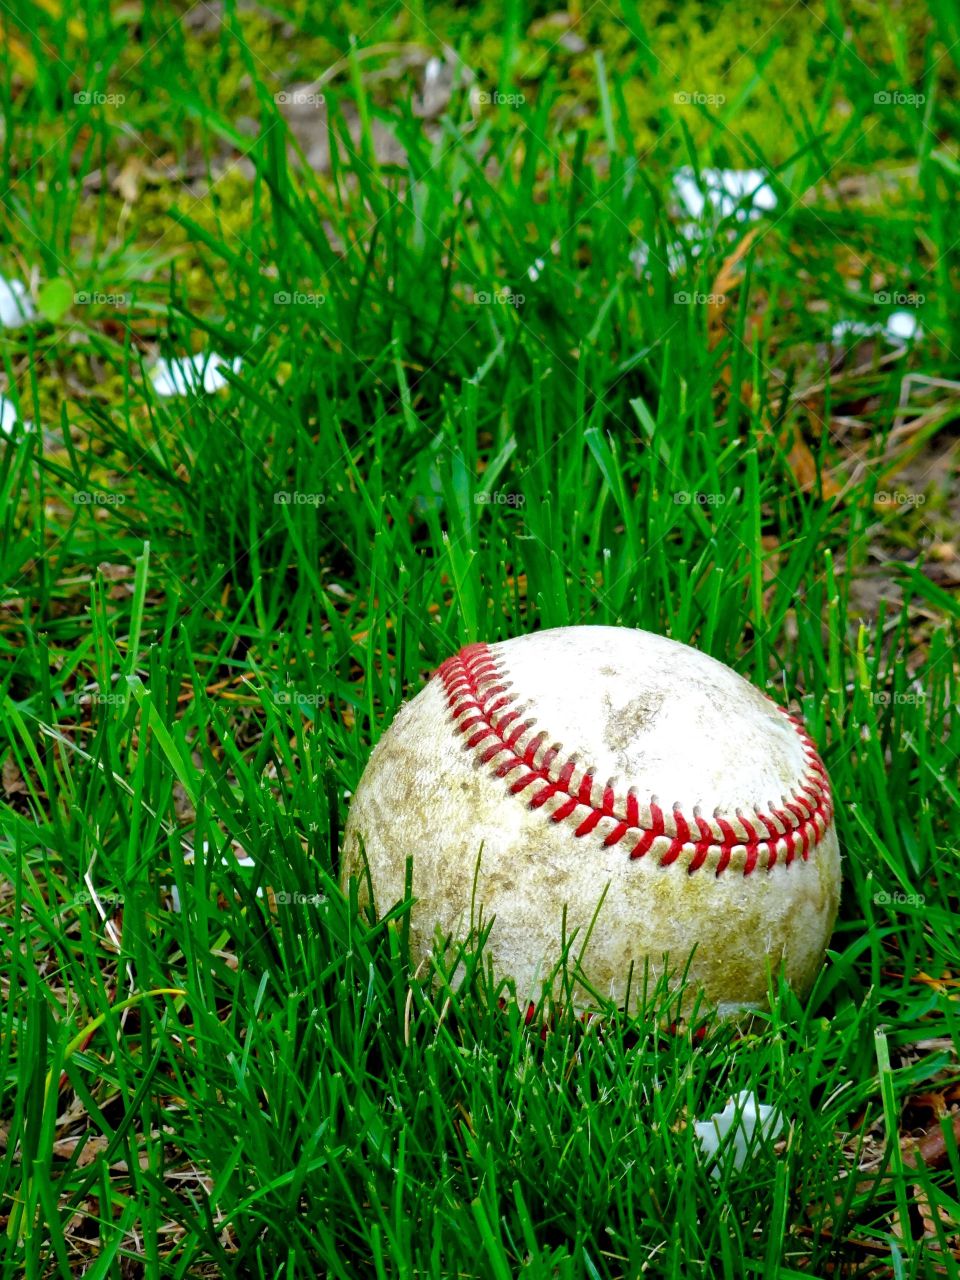 play ball!. A ball is not an adventure unless it's in a child's hand... There dreams can be made!